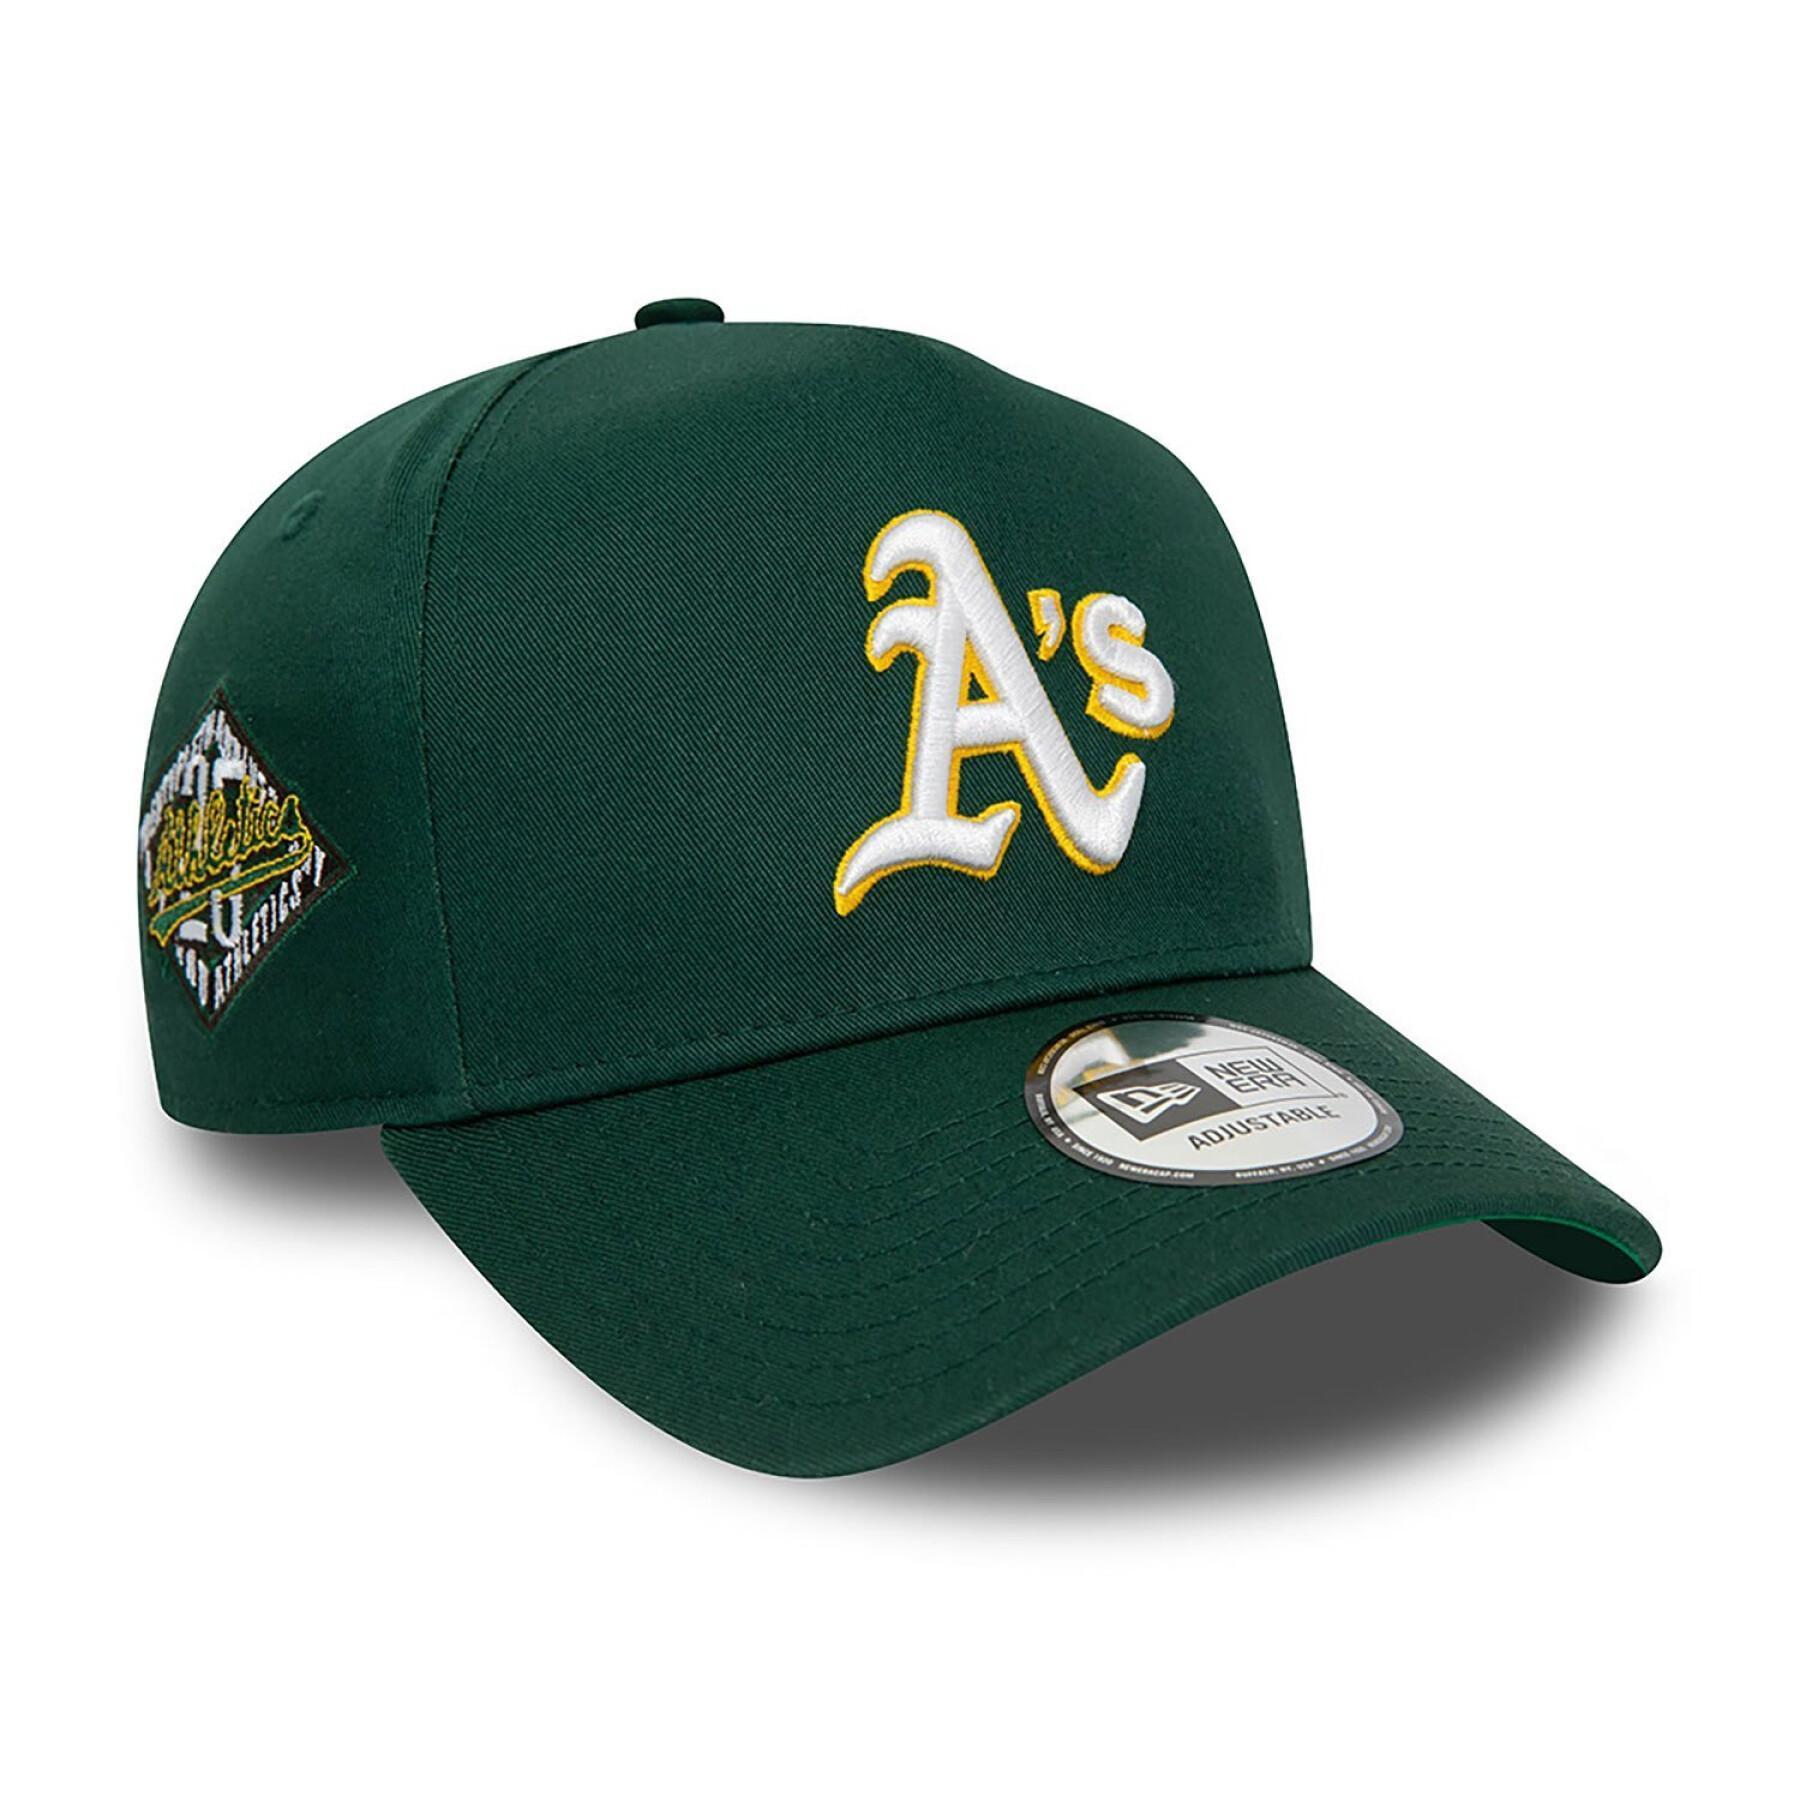 Casquette 9forty Oakland Athletics Patch